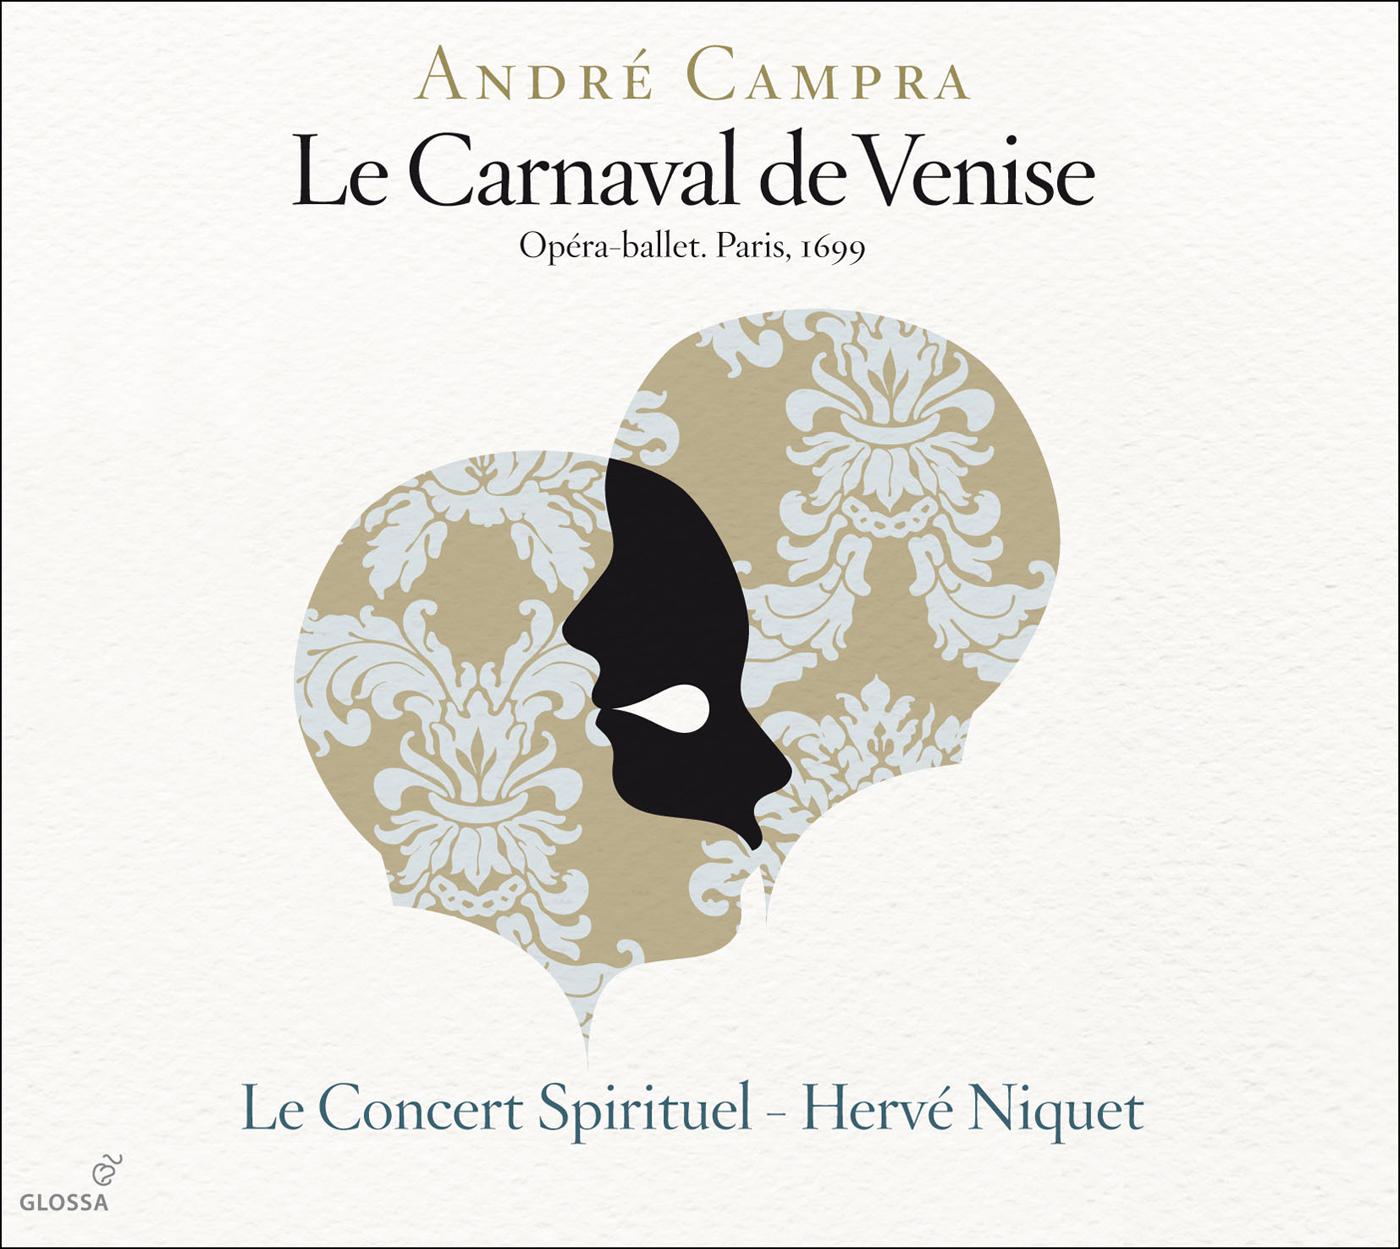 Le carnaval de Venise: Act II: First Air for the Followers of Fortune